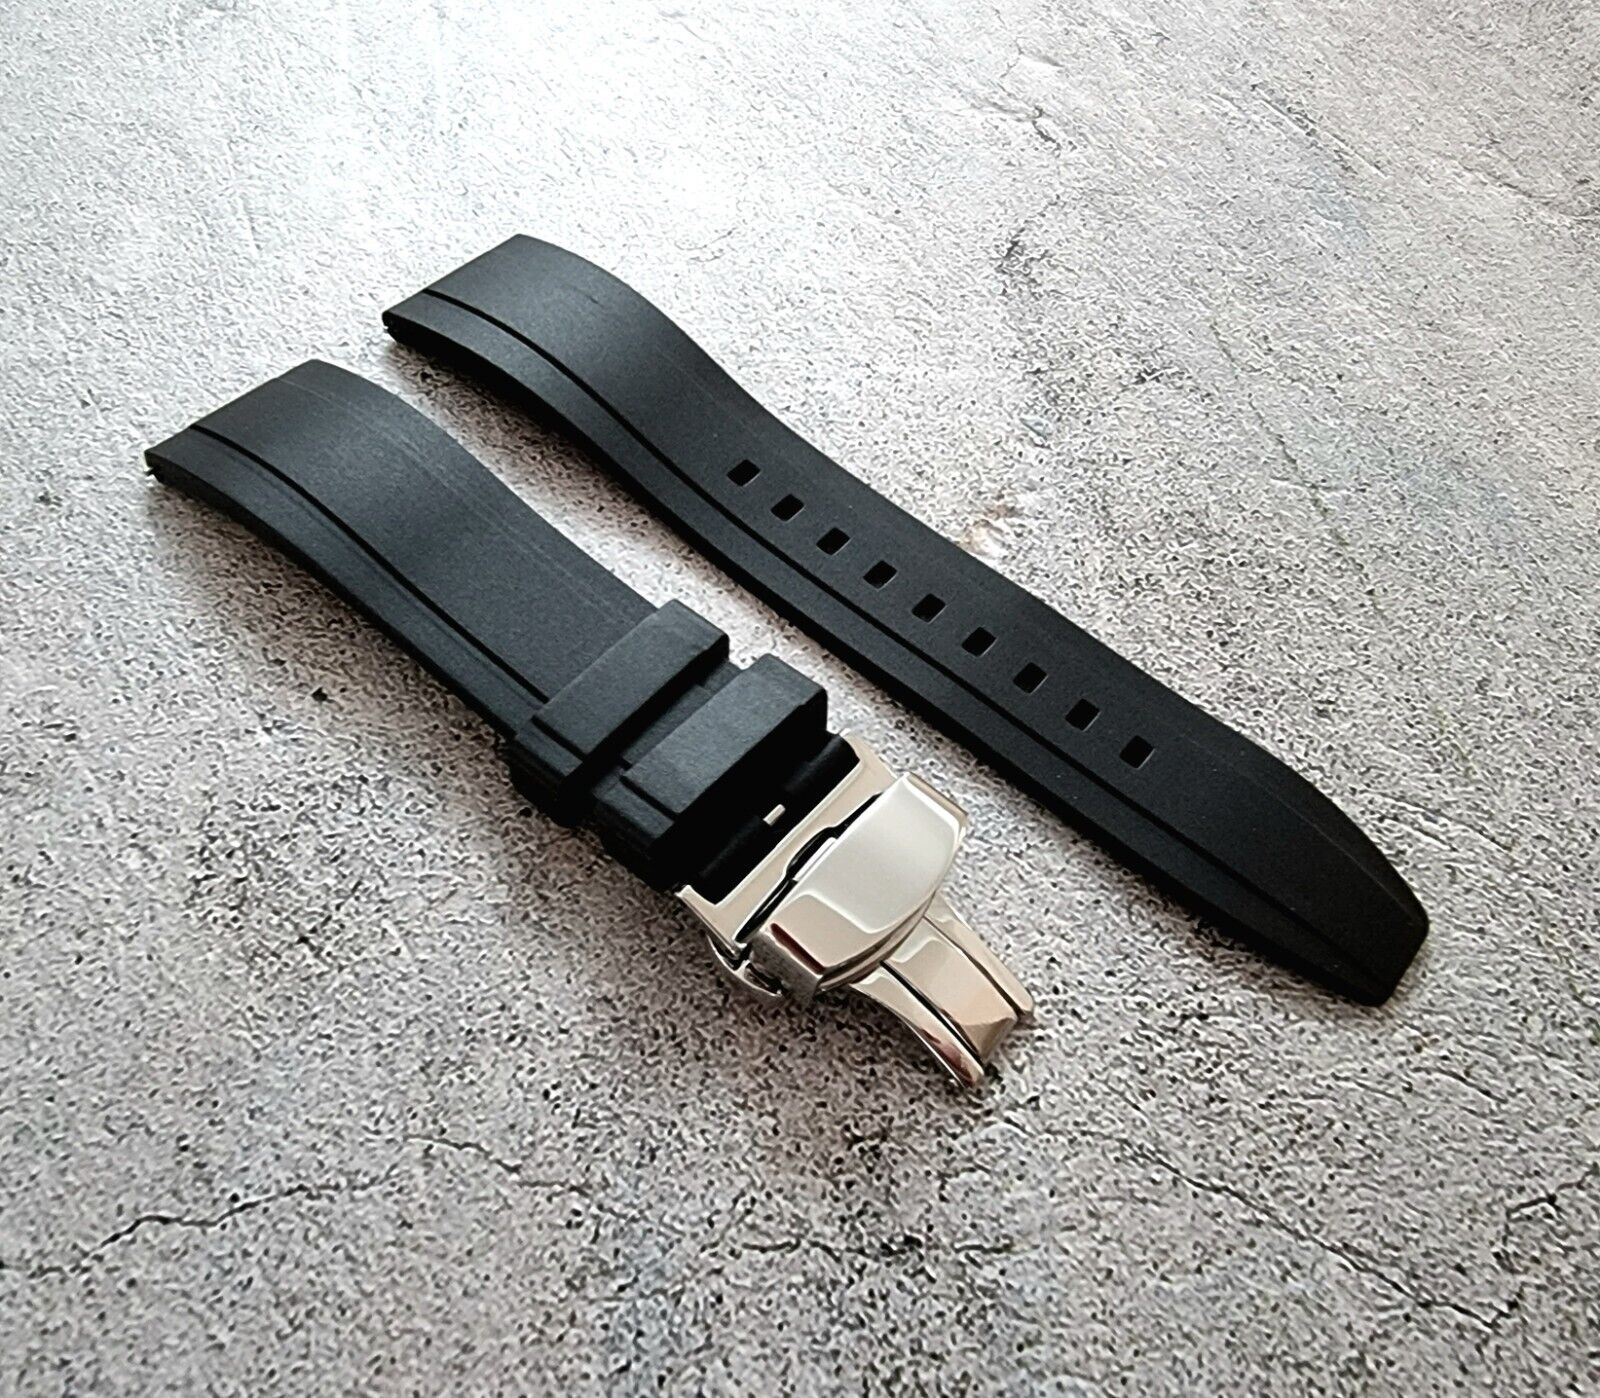 Authentic Cartier Leather Watch Strap with Deployment Clasp Buckle - Ruby  Lane